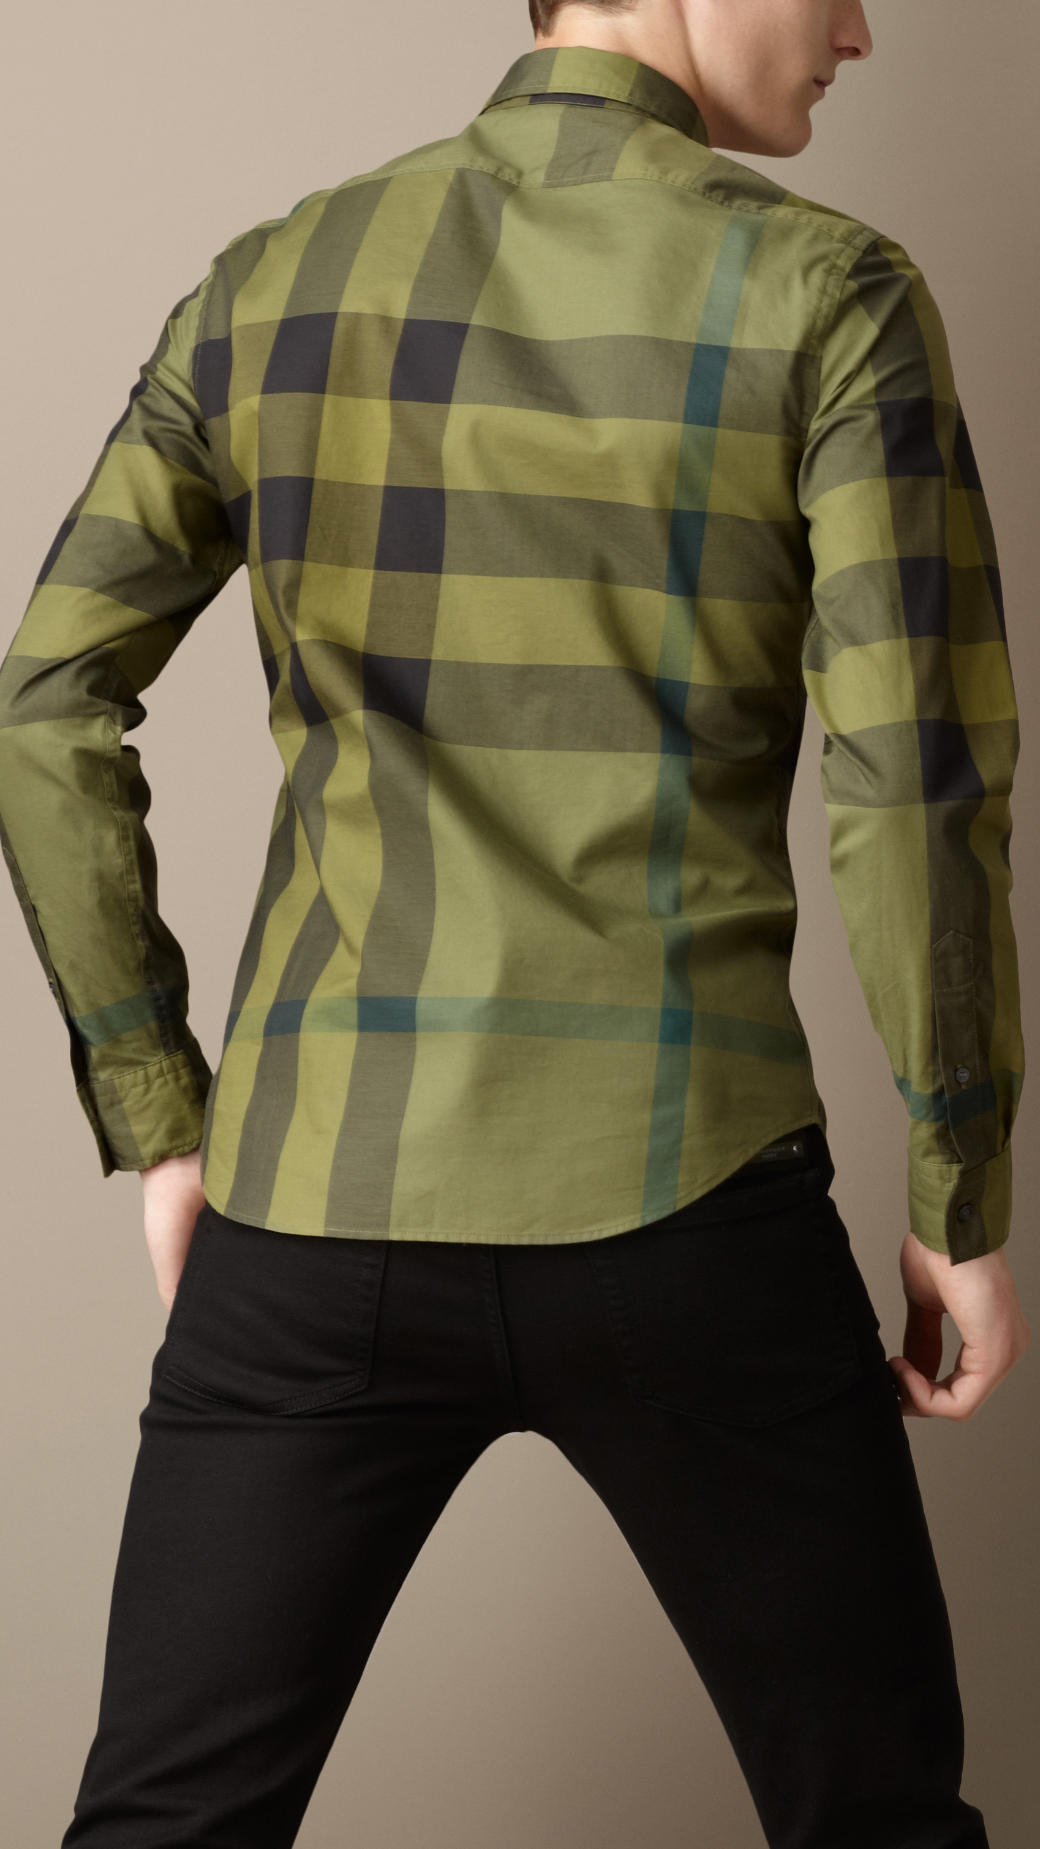 Lyst - Burberry Exploded Check Cotton Shirt in Green for Men